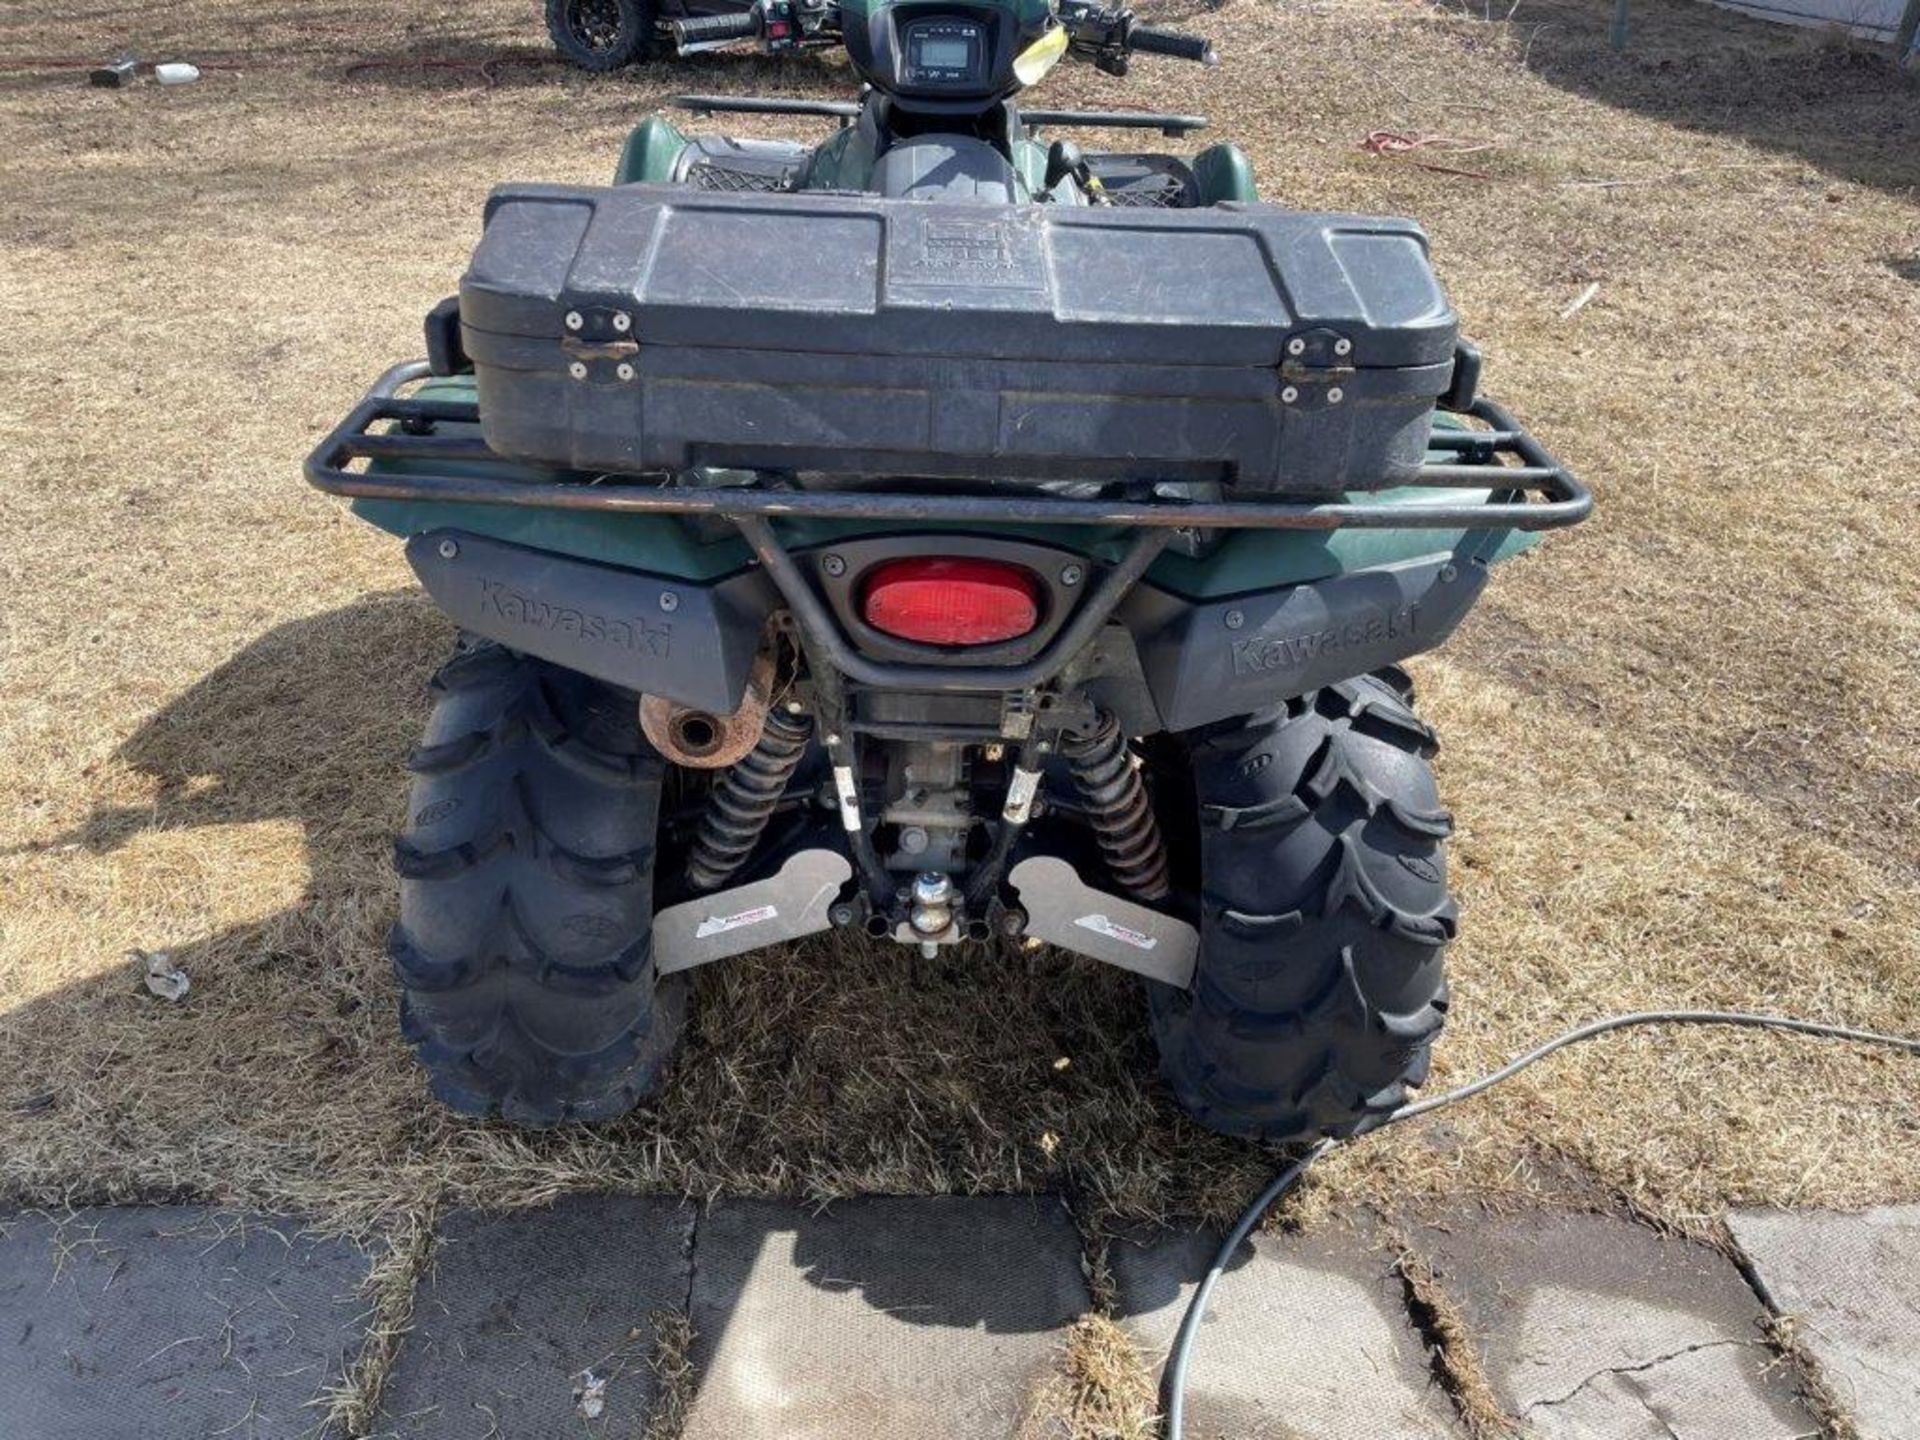 2007 KAWASAKI BRUTE FORCE 750 ATV 4X4 AUTO, RECENT CARB CLEAN, NEW BATTERY, 1762 KM'S SHOWING - Image 4 of 19